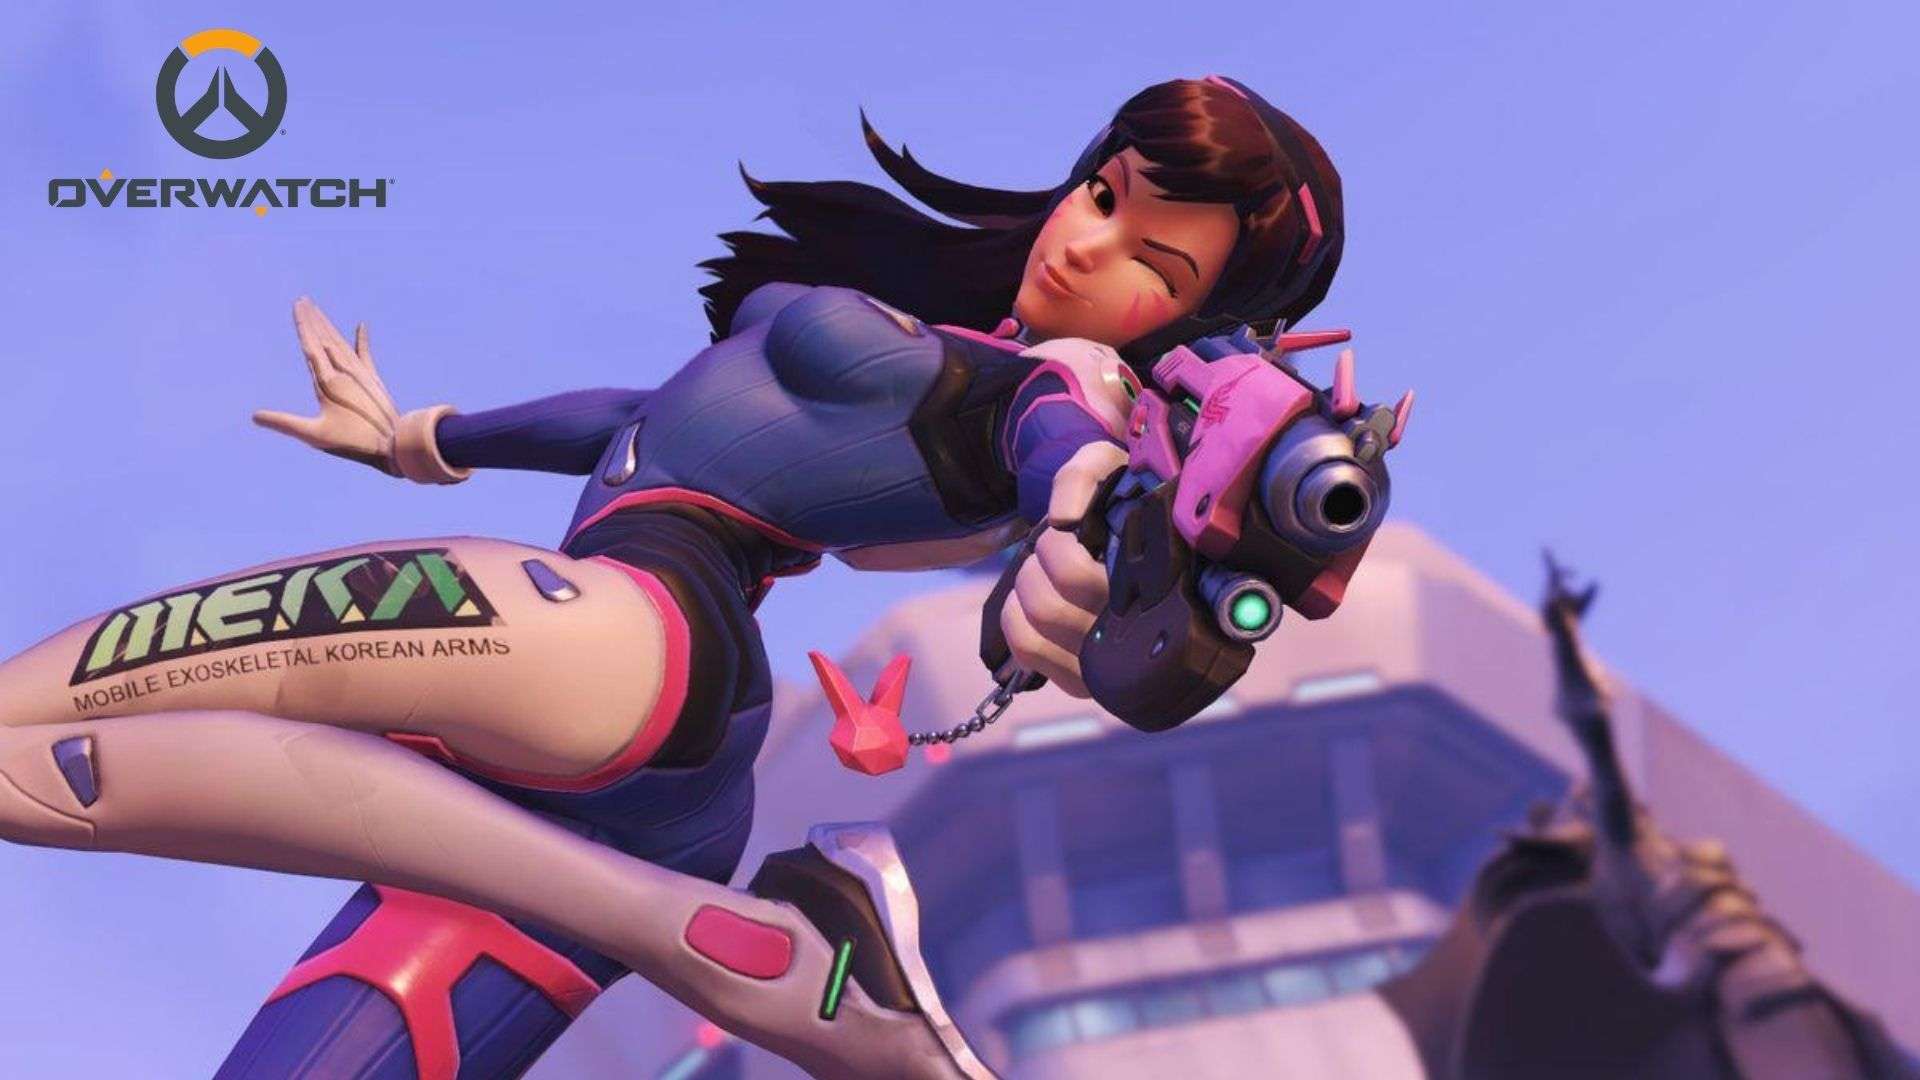 D.Va from Overwatch jumping